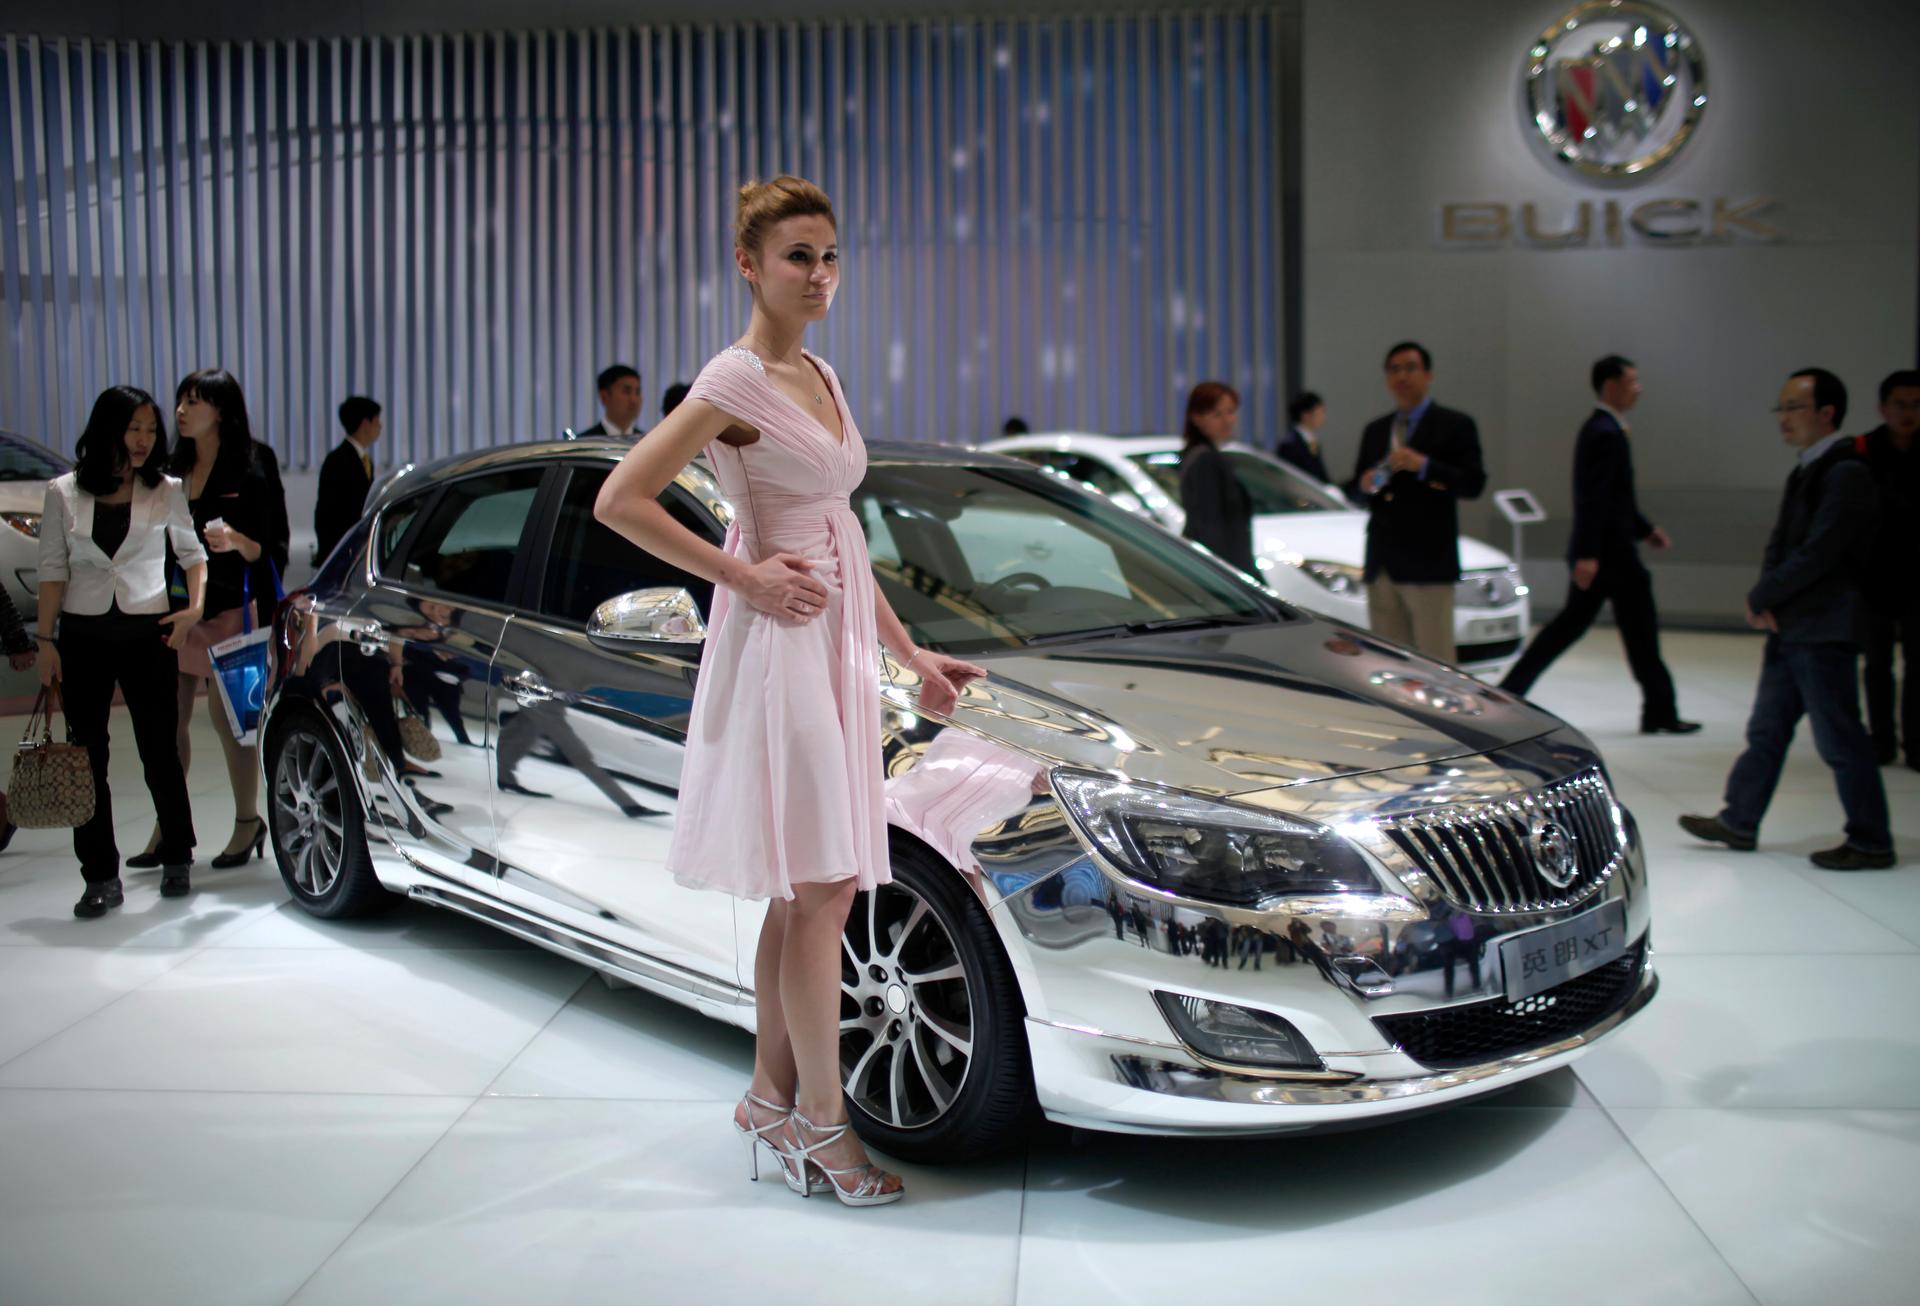 A model poses next to the Buick Excelle XT during the opening day of the Shanghai Auto Show April 19, 2011.